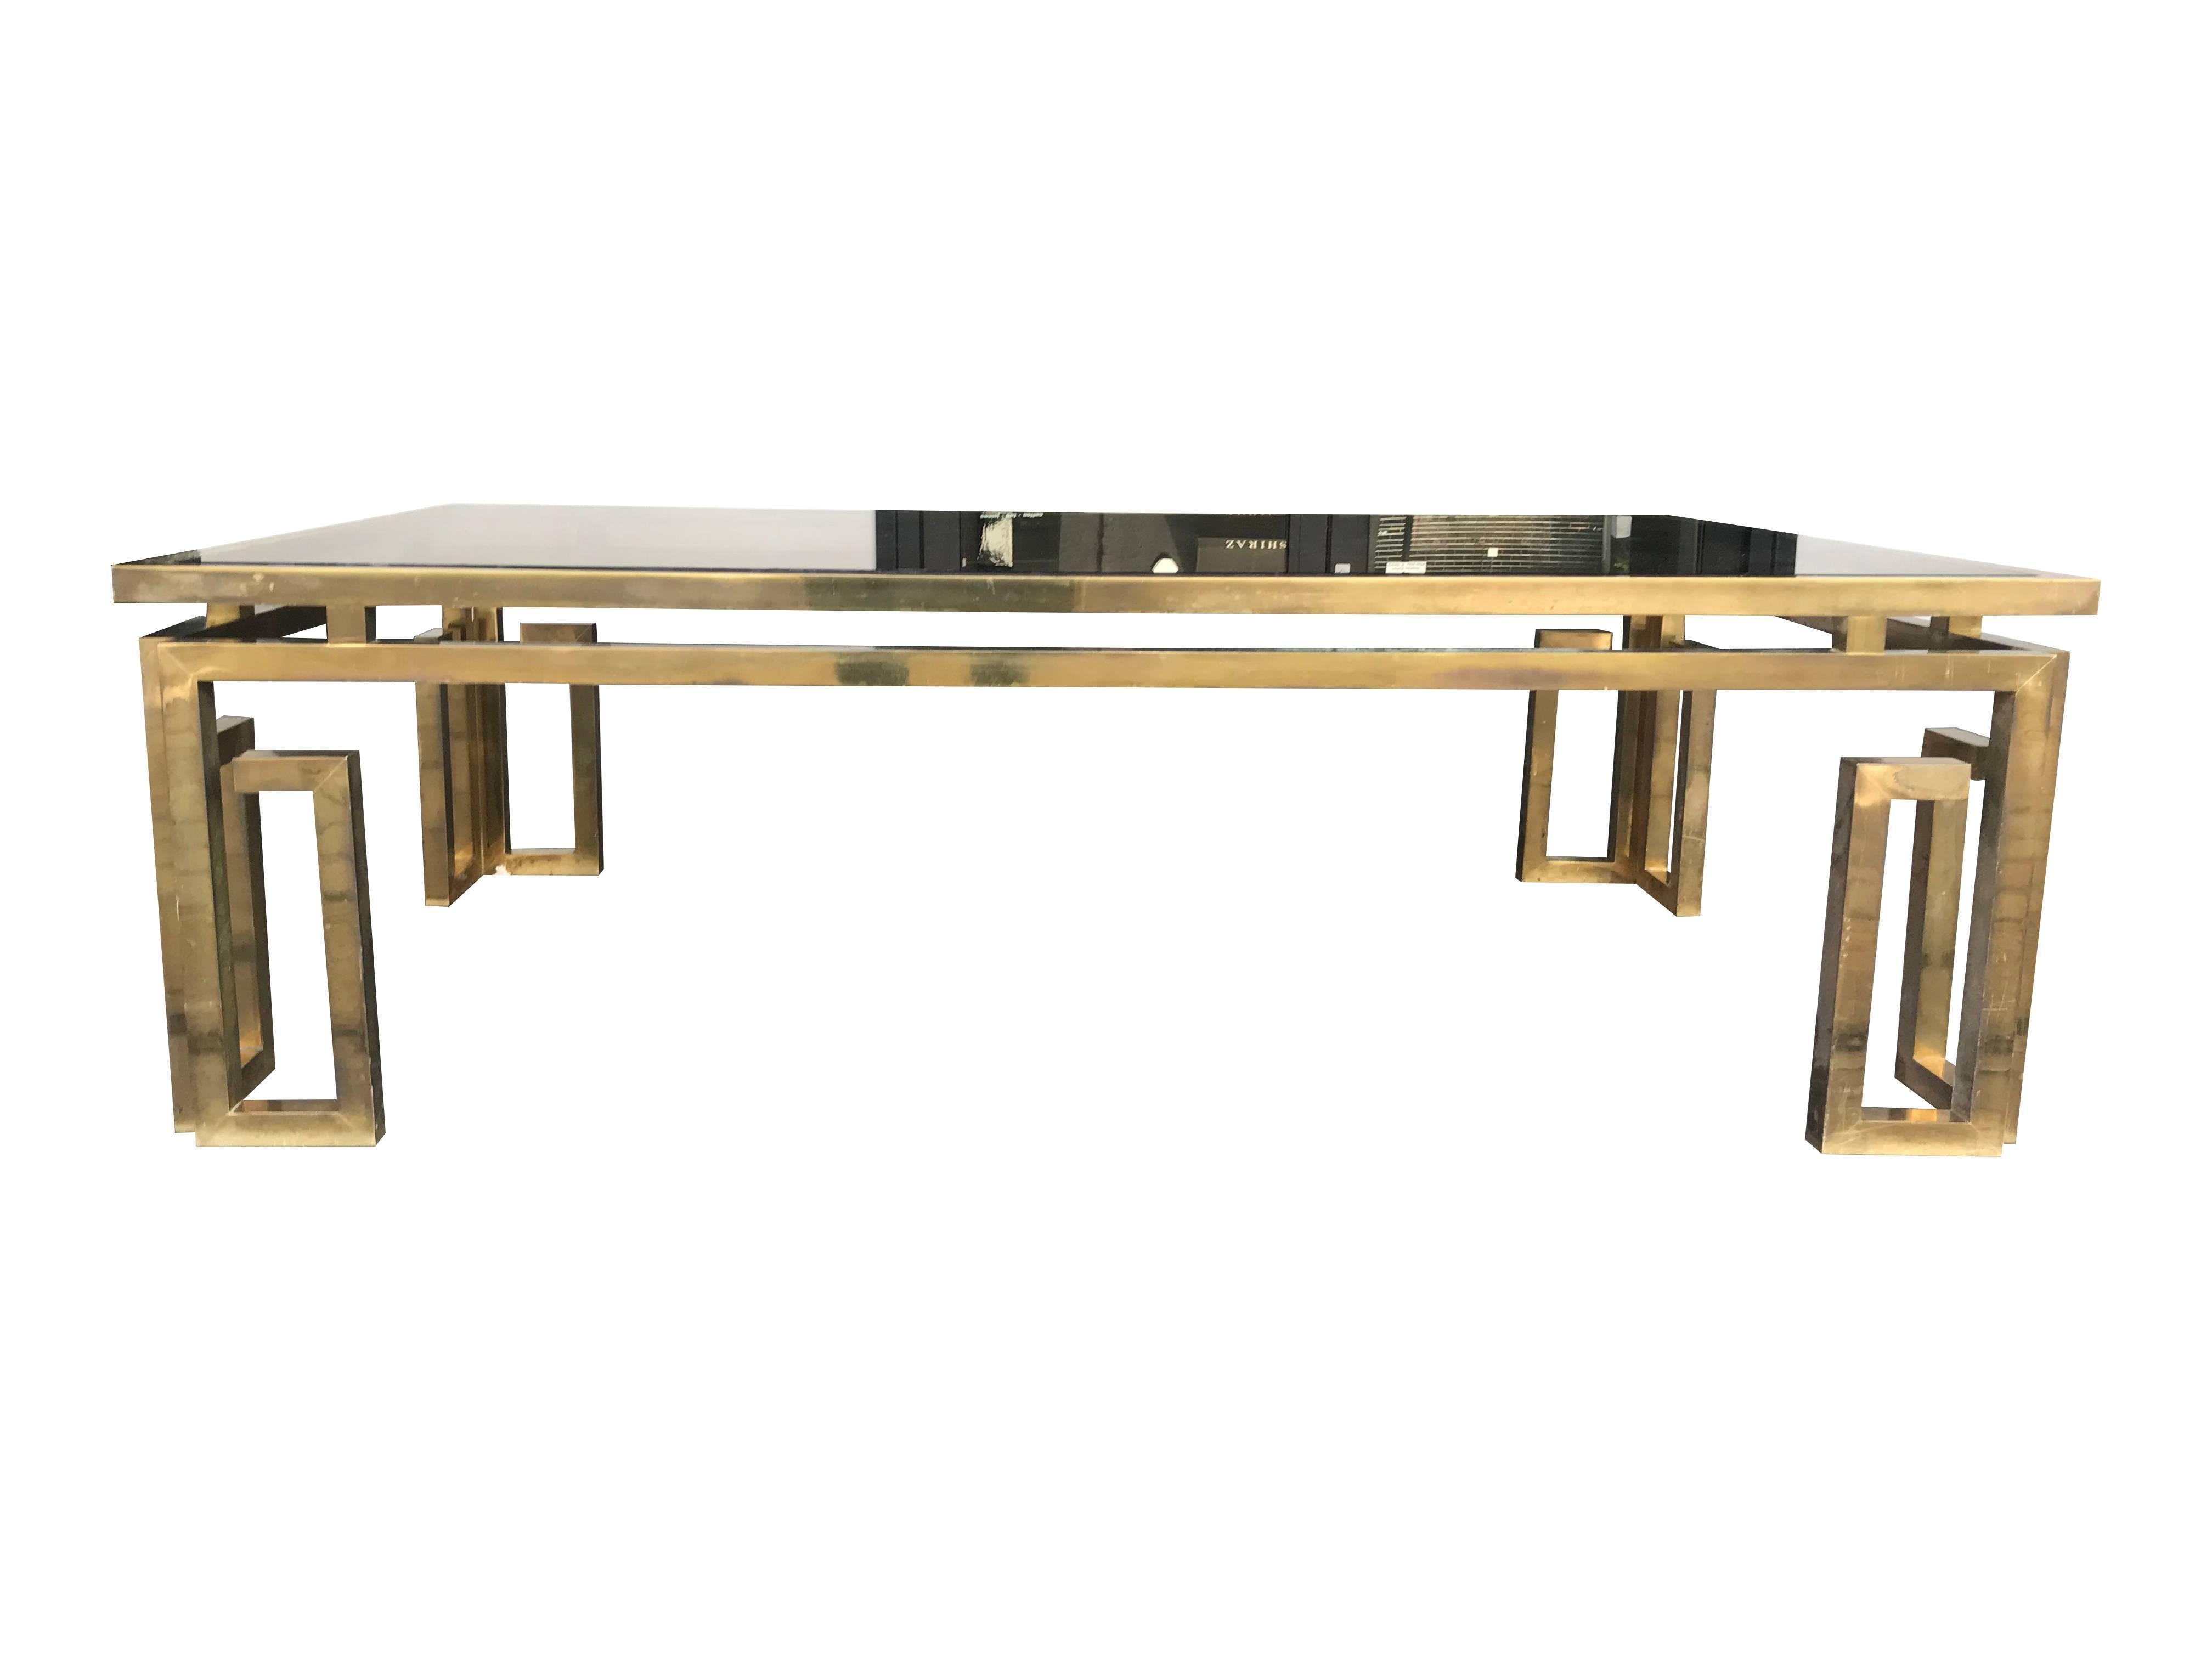 Late 20th Century Italian Brass Coffee Table with Smoked Glass Top